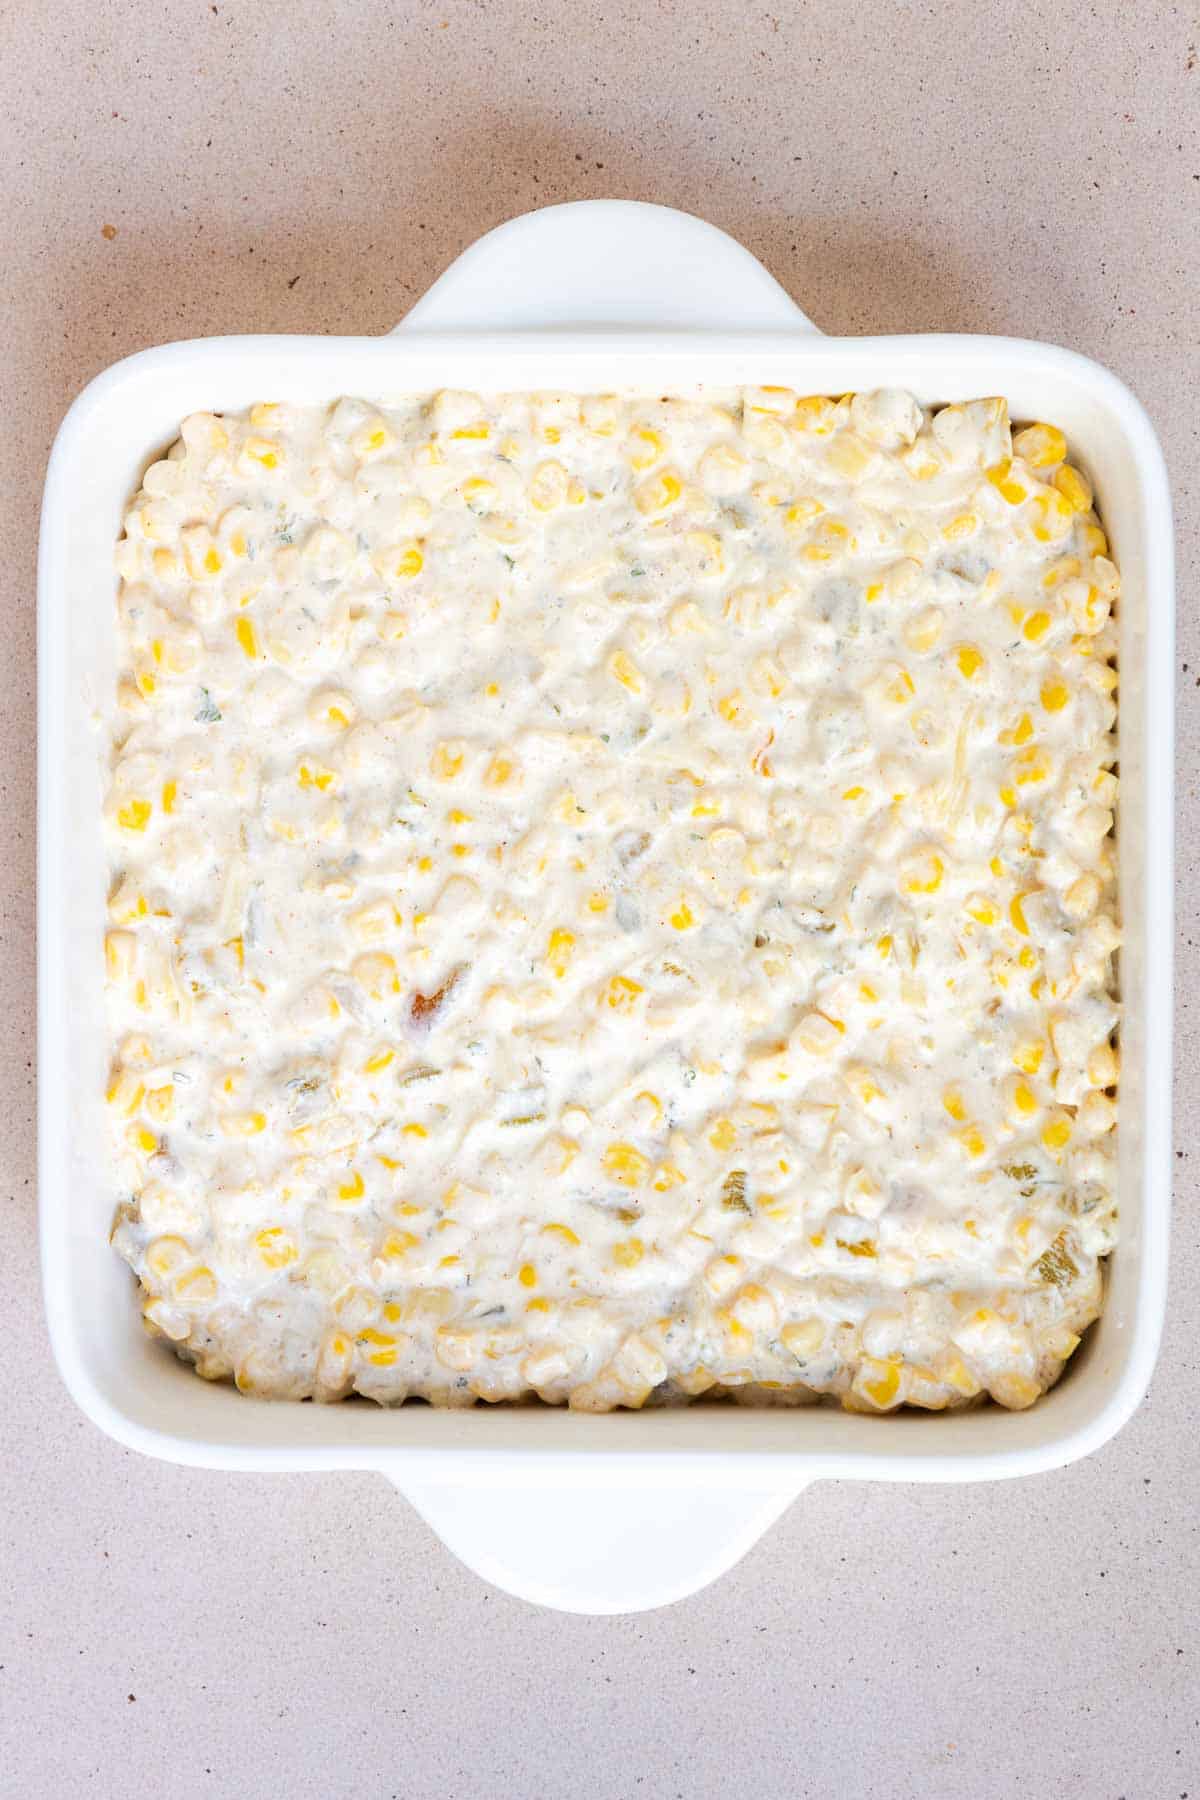 The corn casserole mixture is transferred to an 8 by 8 inch baking dish.